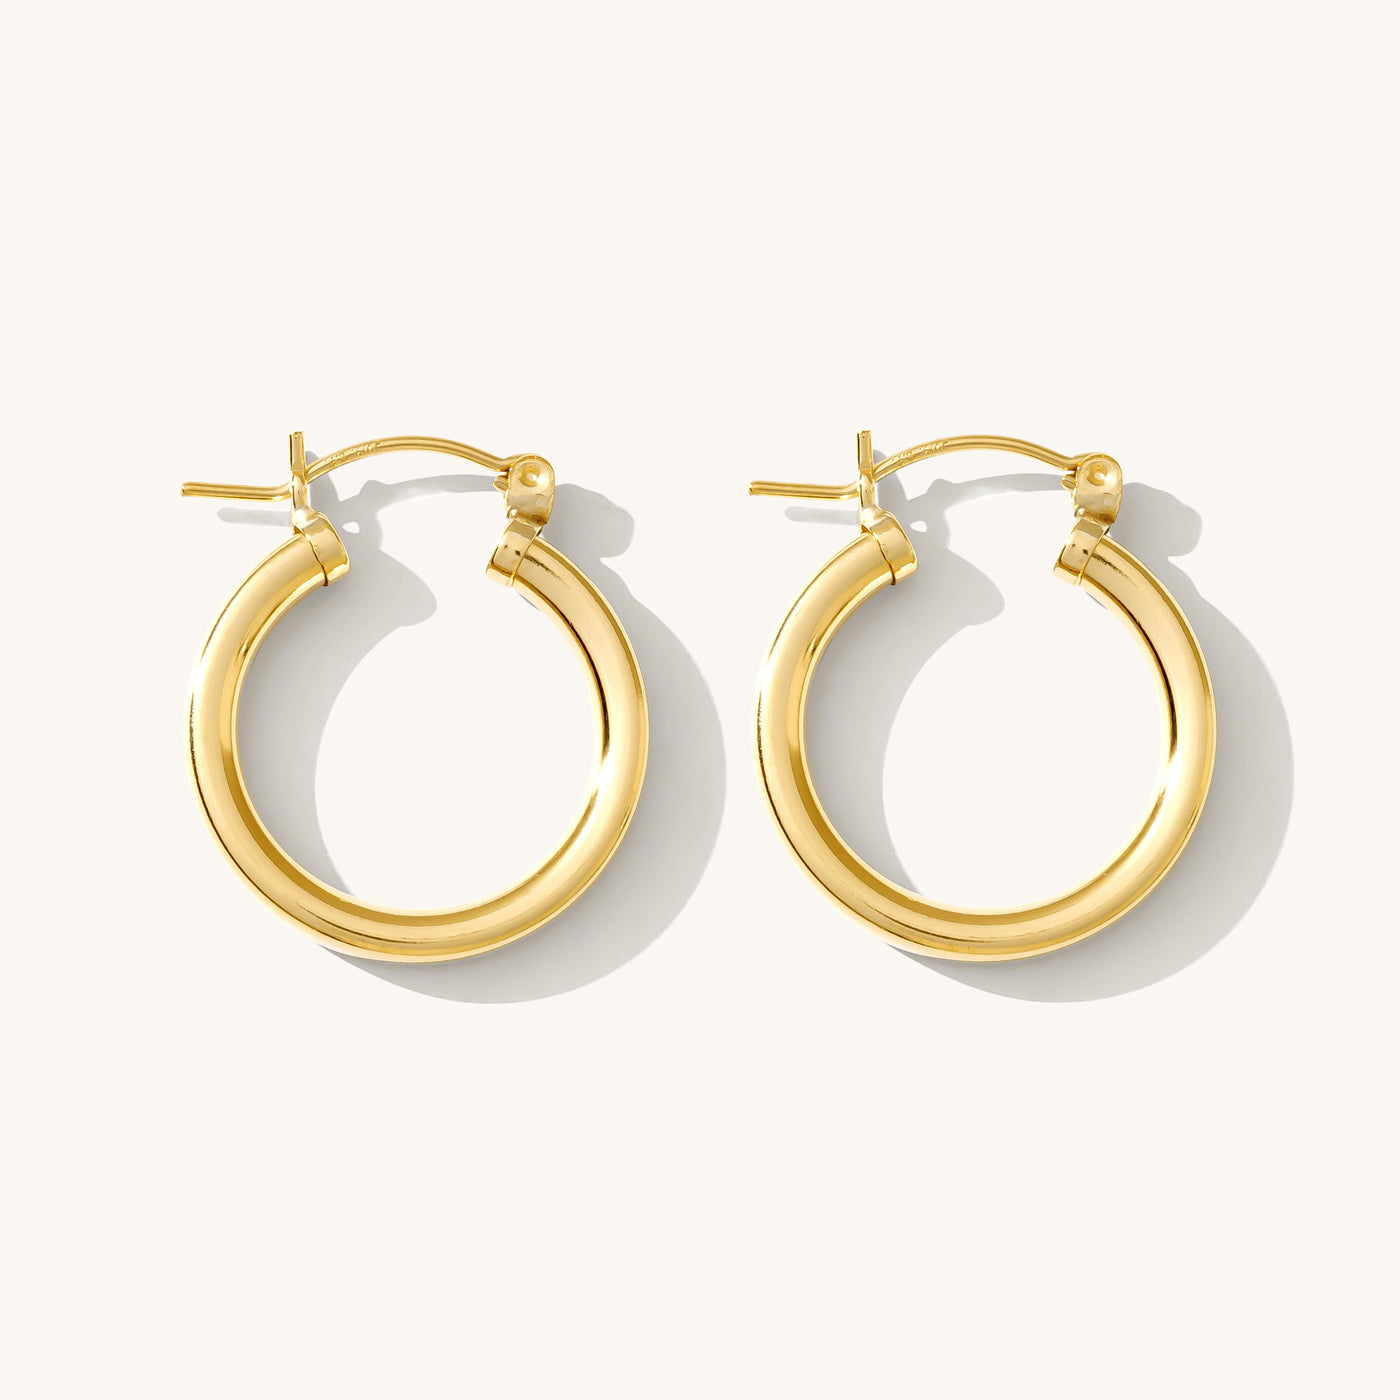 Buy Gold Small Chunky Hoop Earring Online - Accessorize India